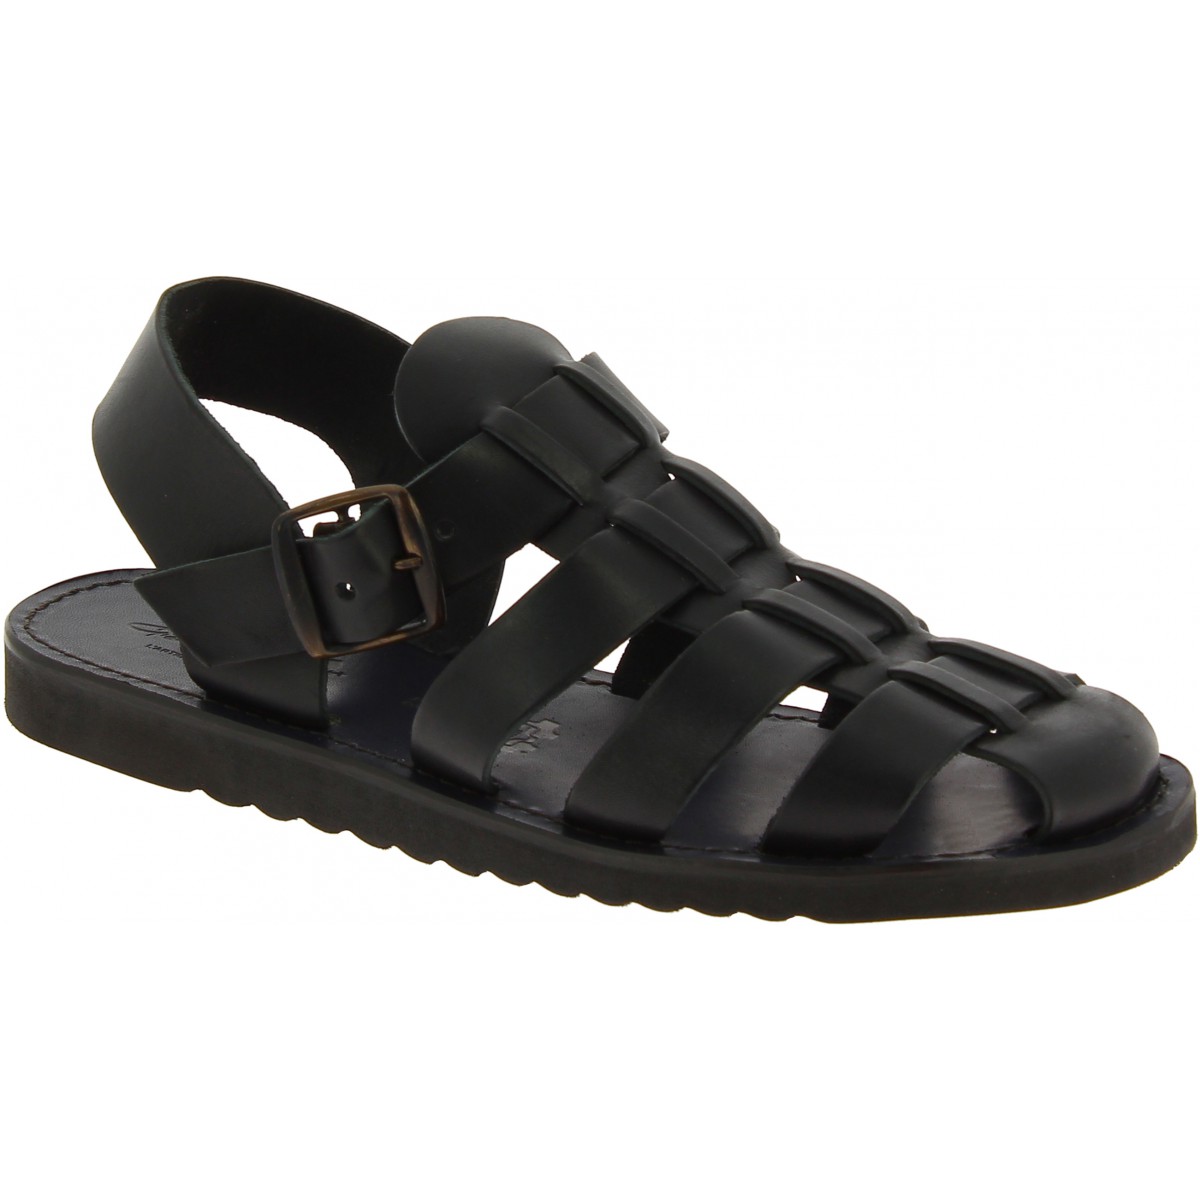 fisherman sandals in black leather 